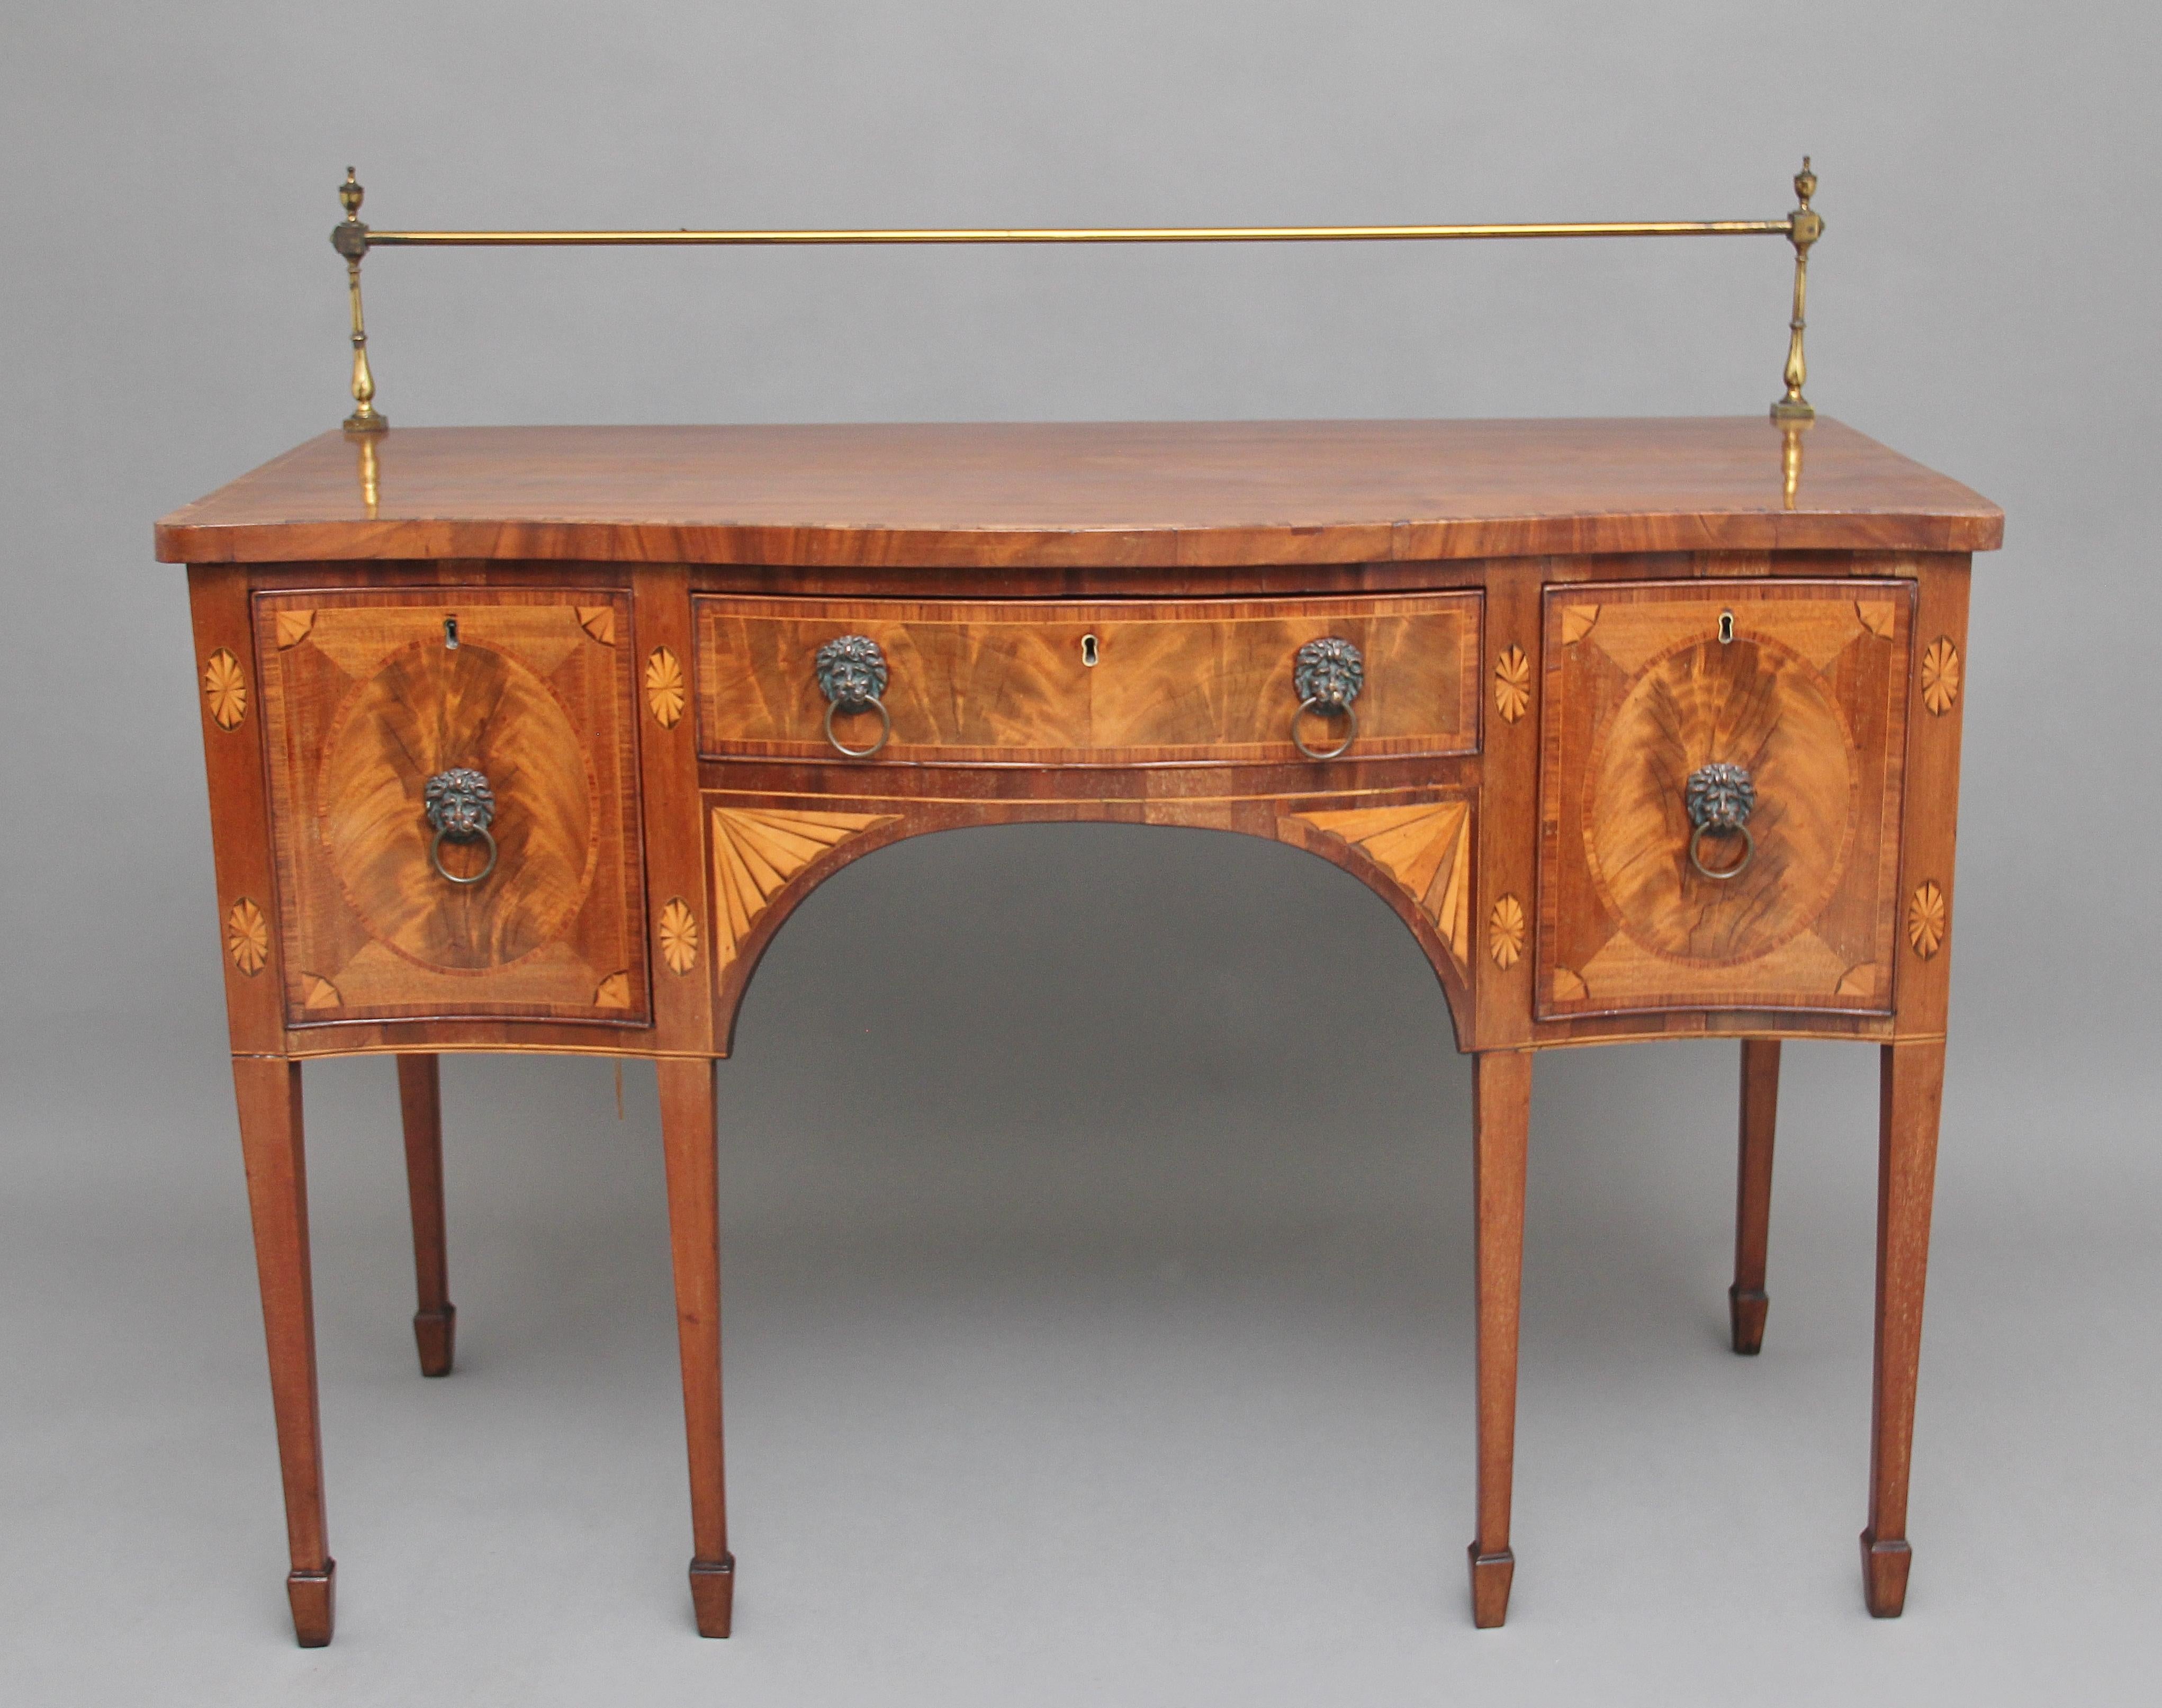 Early 19th Century Mahogany Inlaid Serpentine Sideboard For Sale 3